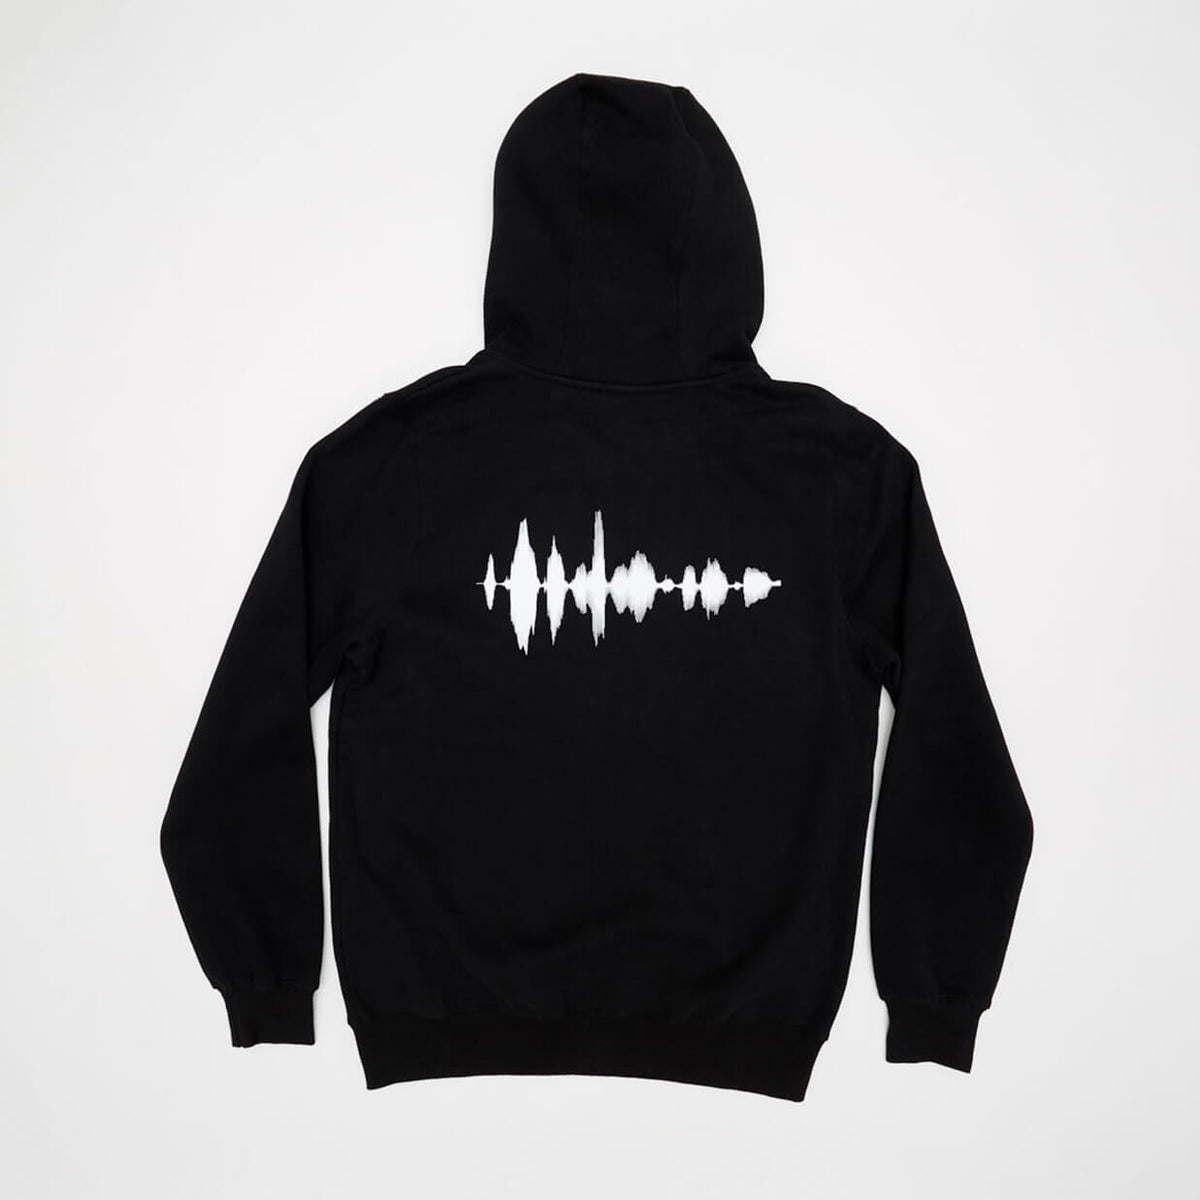 Vinyl - Abbey Road : Abbey Road Soundwave Zipped Hoodie - The Record Hub